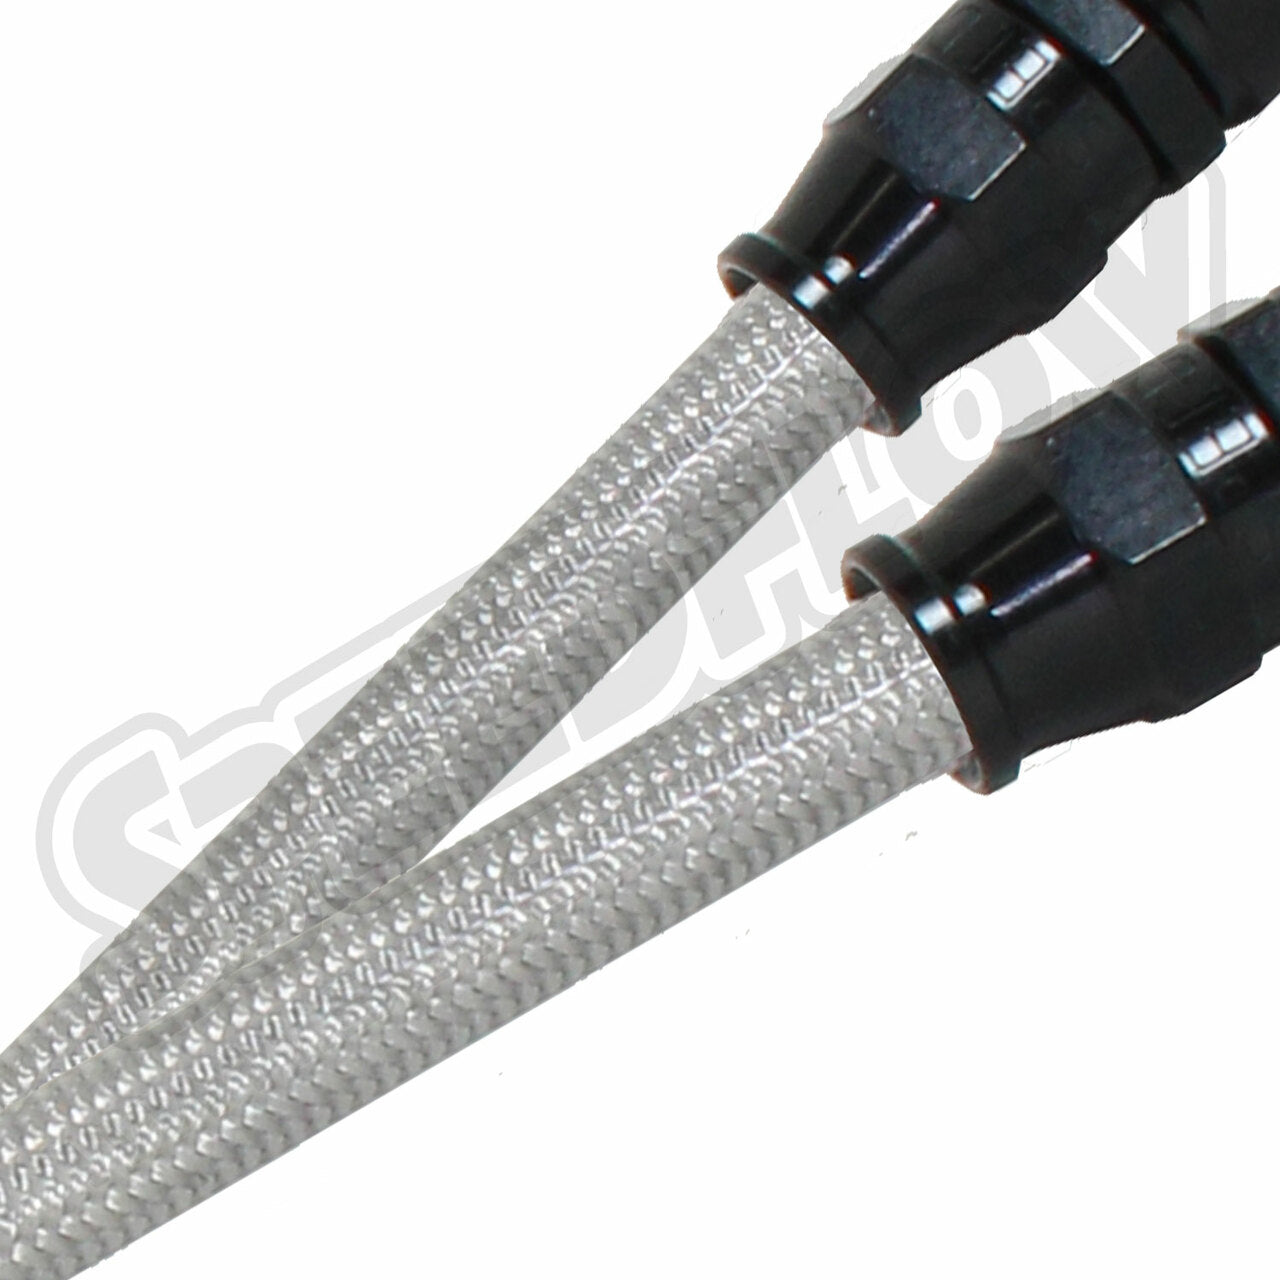 Speedflow 200 Series Teflon Braided Hose with Clear PVC Cover -3 Only